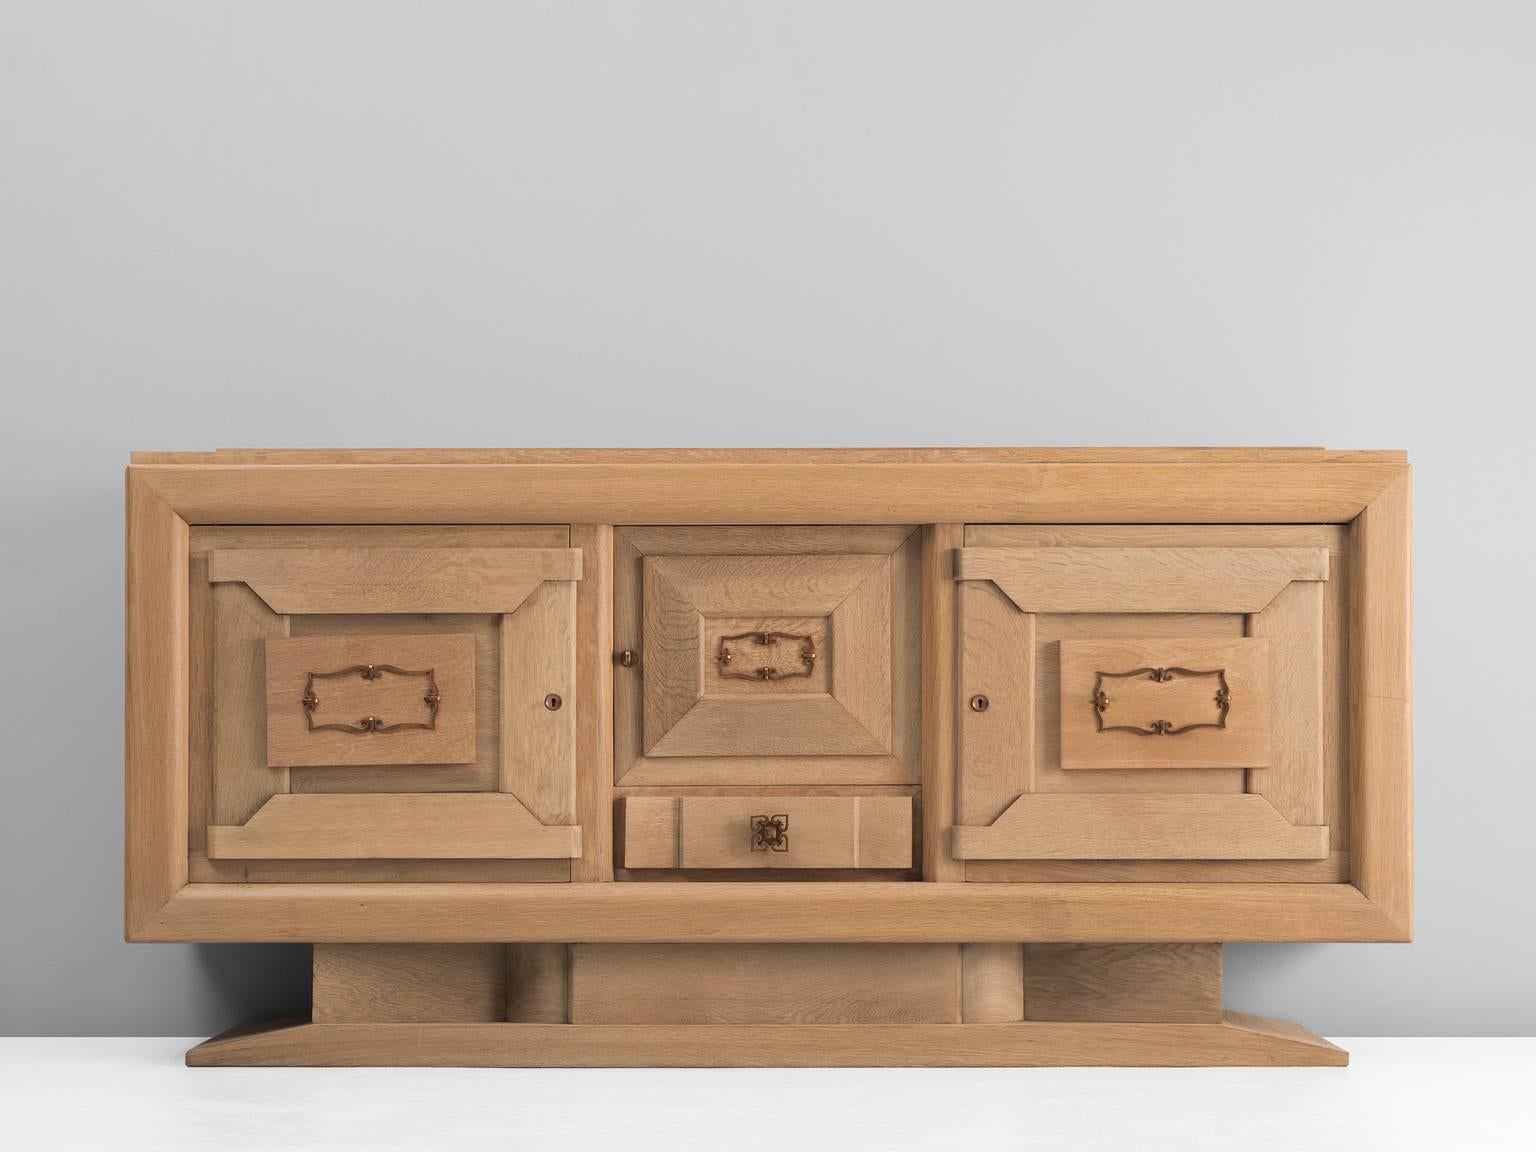 Cabinet, in oak and brass, by Charles Dudouyt, France, 1930s. 

French Art Deco oak credenza designed by the decorator Charles Dudouyt. The solid wooden frame gives this sideboard a sturdy character. The door panels show an interesting pattern of